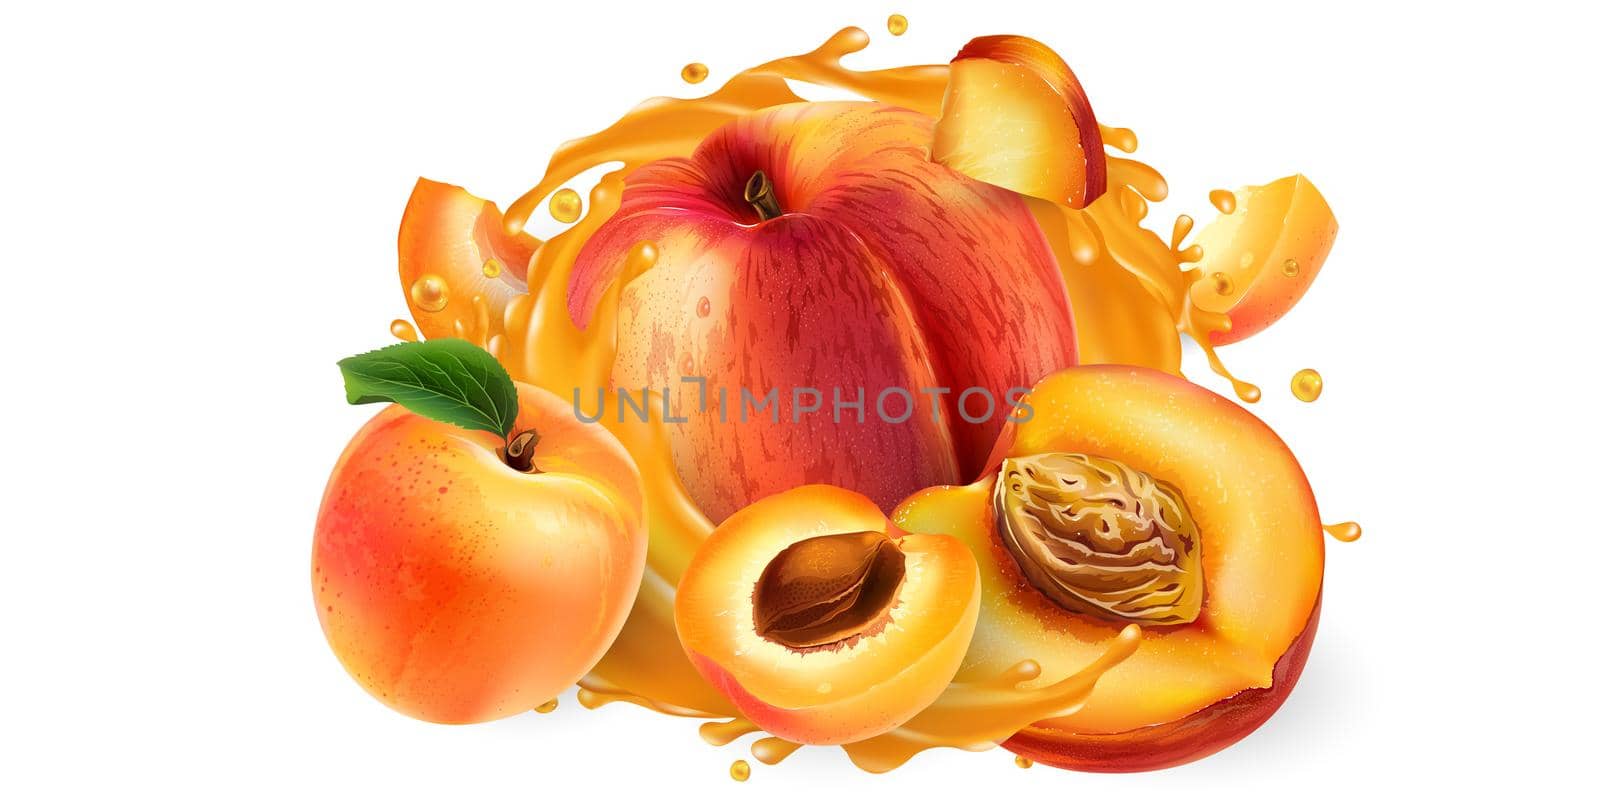 Fresh peaches and apricots and a splash of fruit juice on a white background. Realistic style illustration.